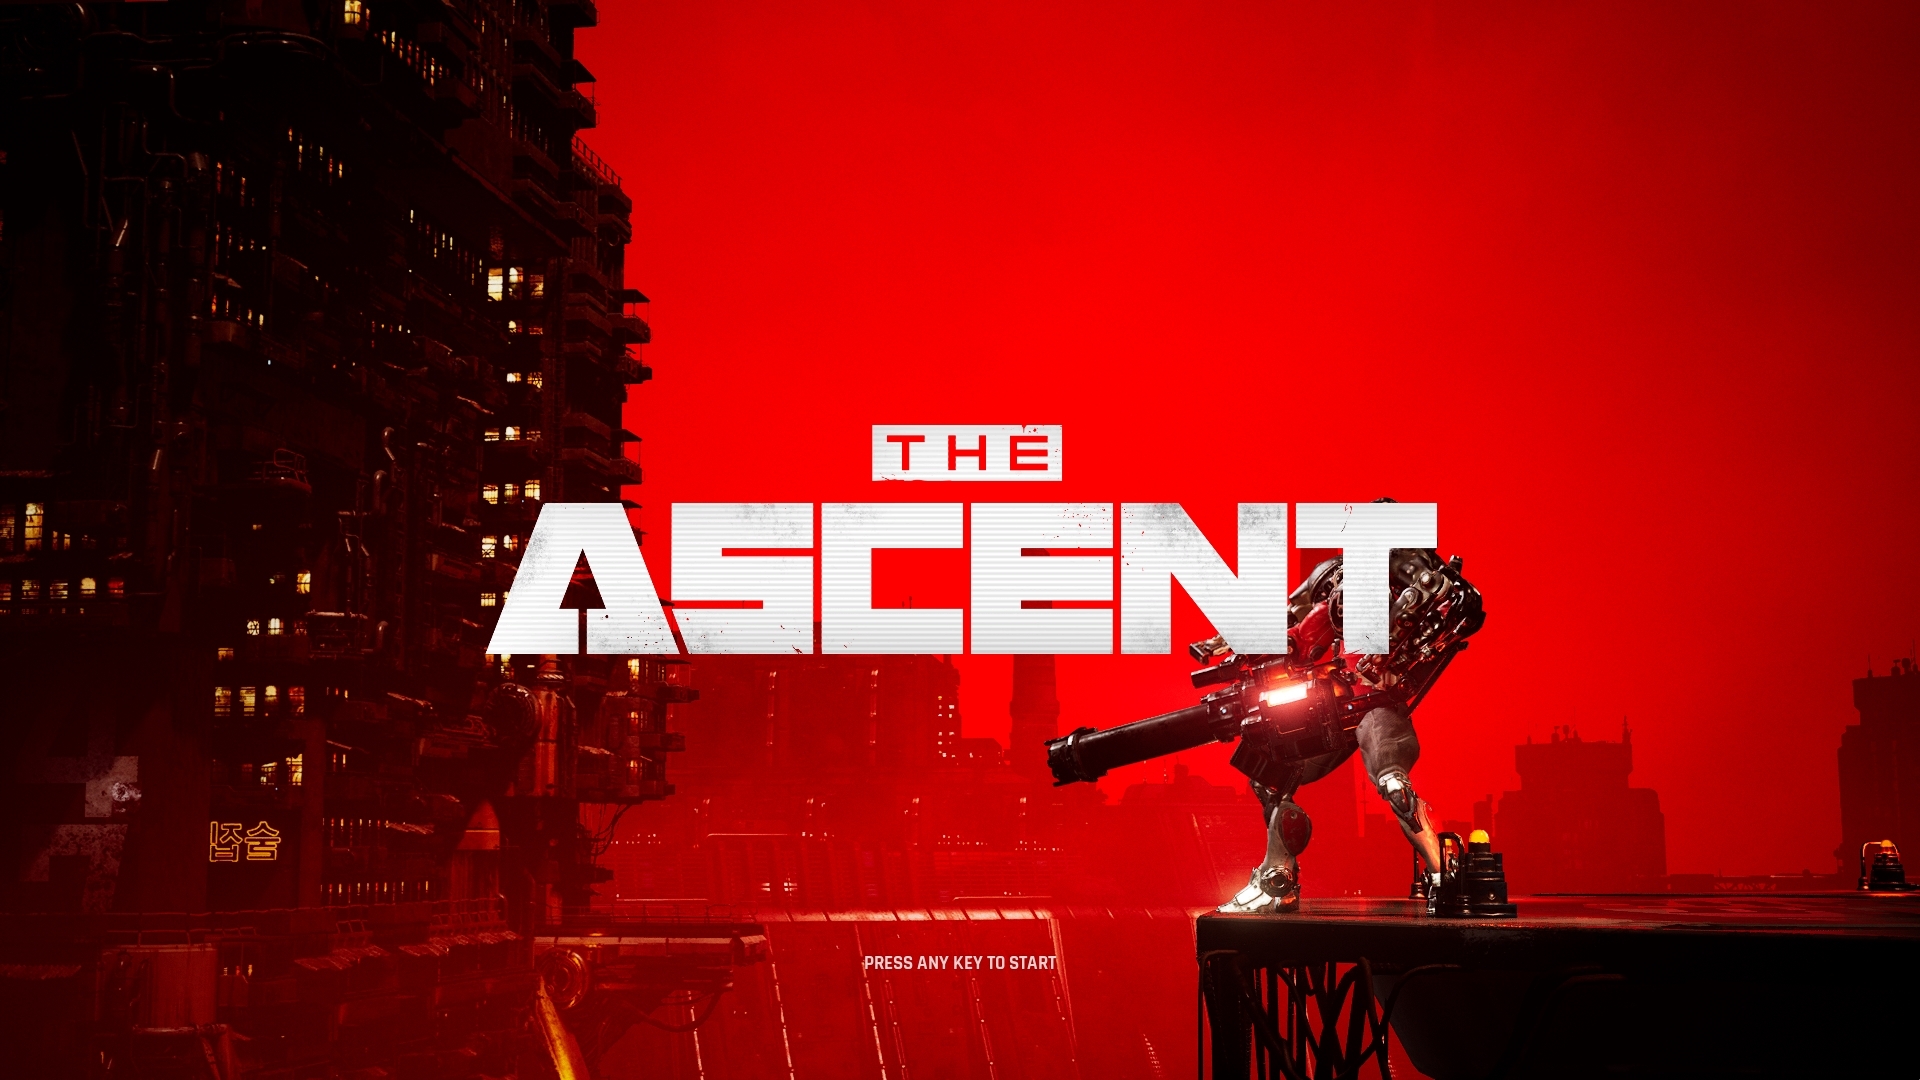 The Ascent - How to Copy Save Game From XBOX to Steam Guide